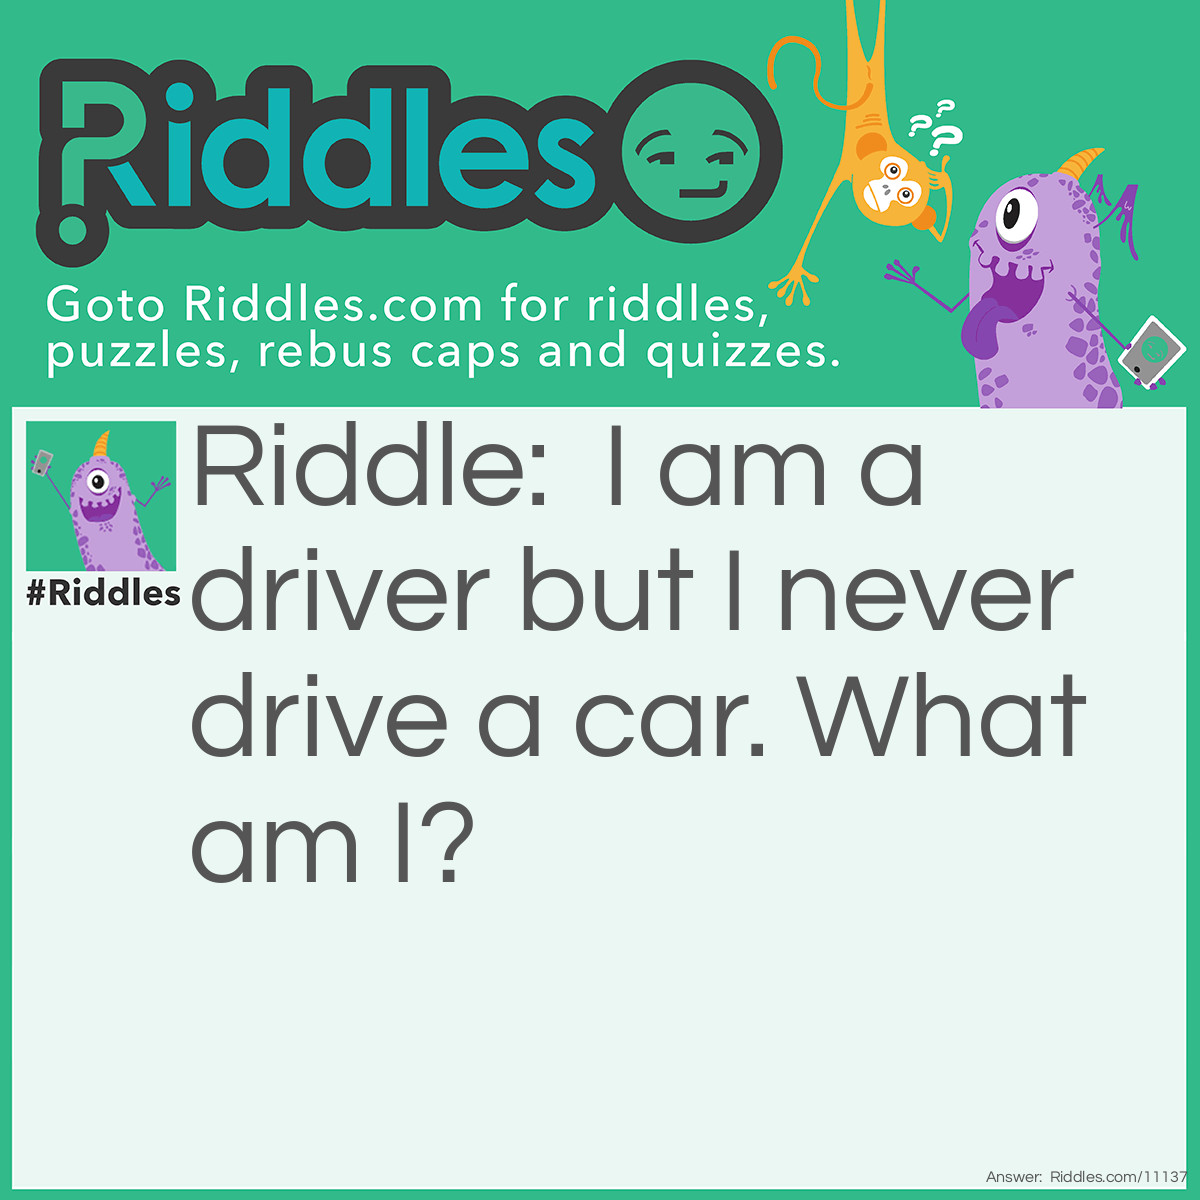 Riddle: I am a driver but I never drive a car. What am I? Answer: A screw-driver.